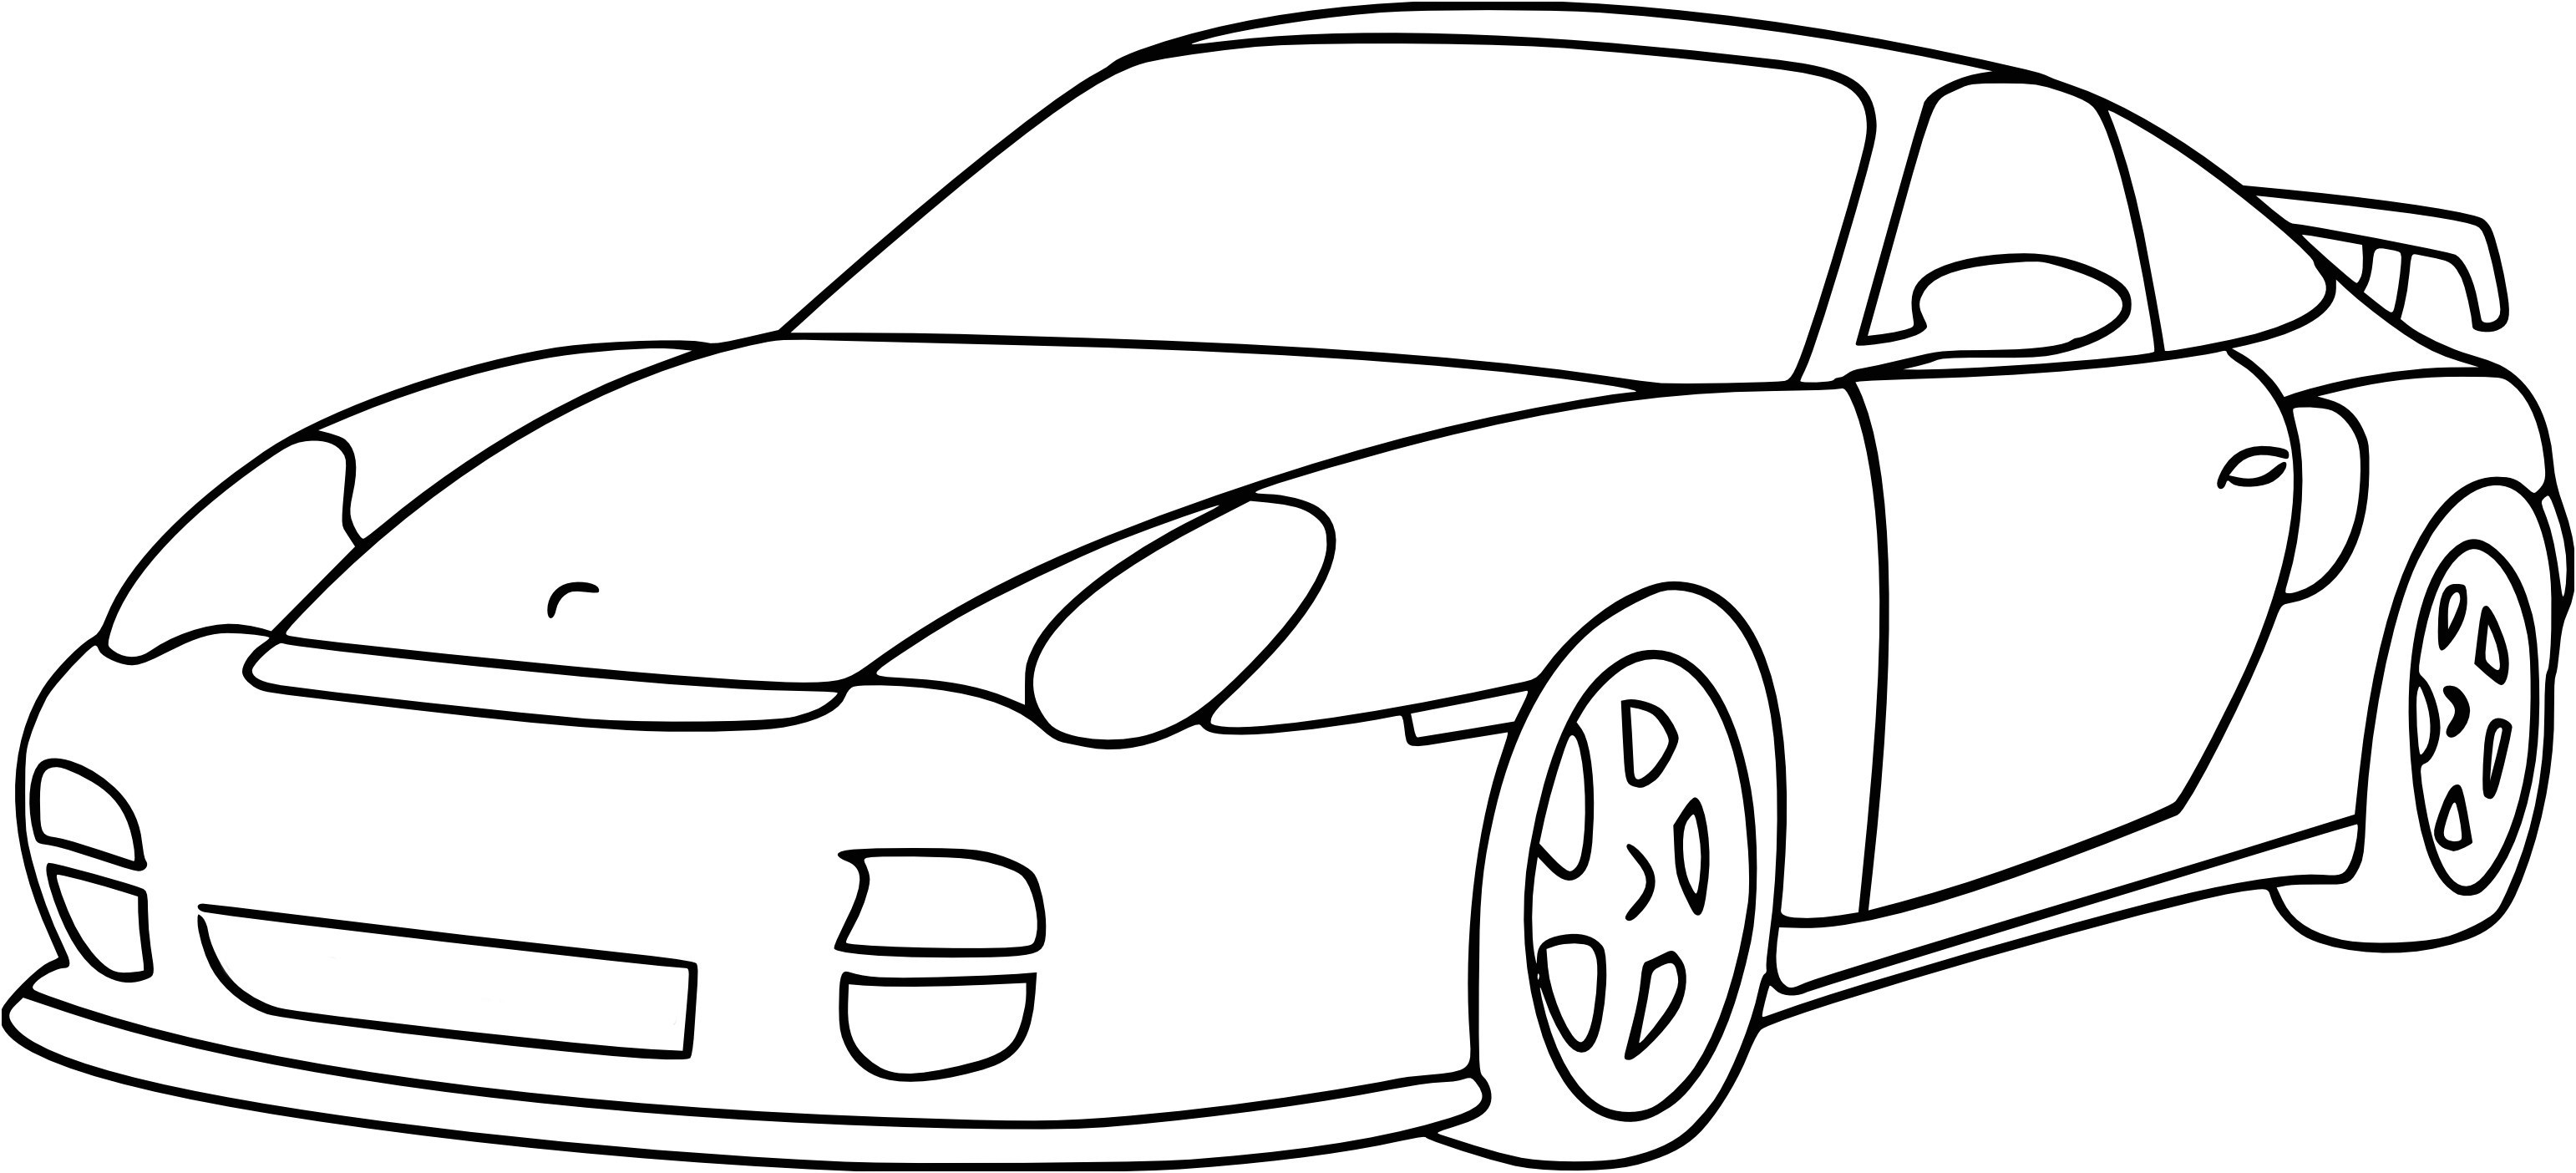 lovely coloriage voiture fast and furious all dessin de colorier